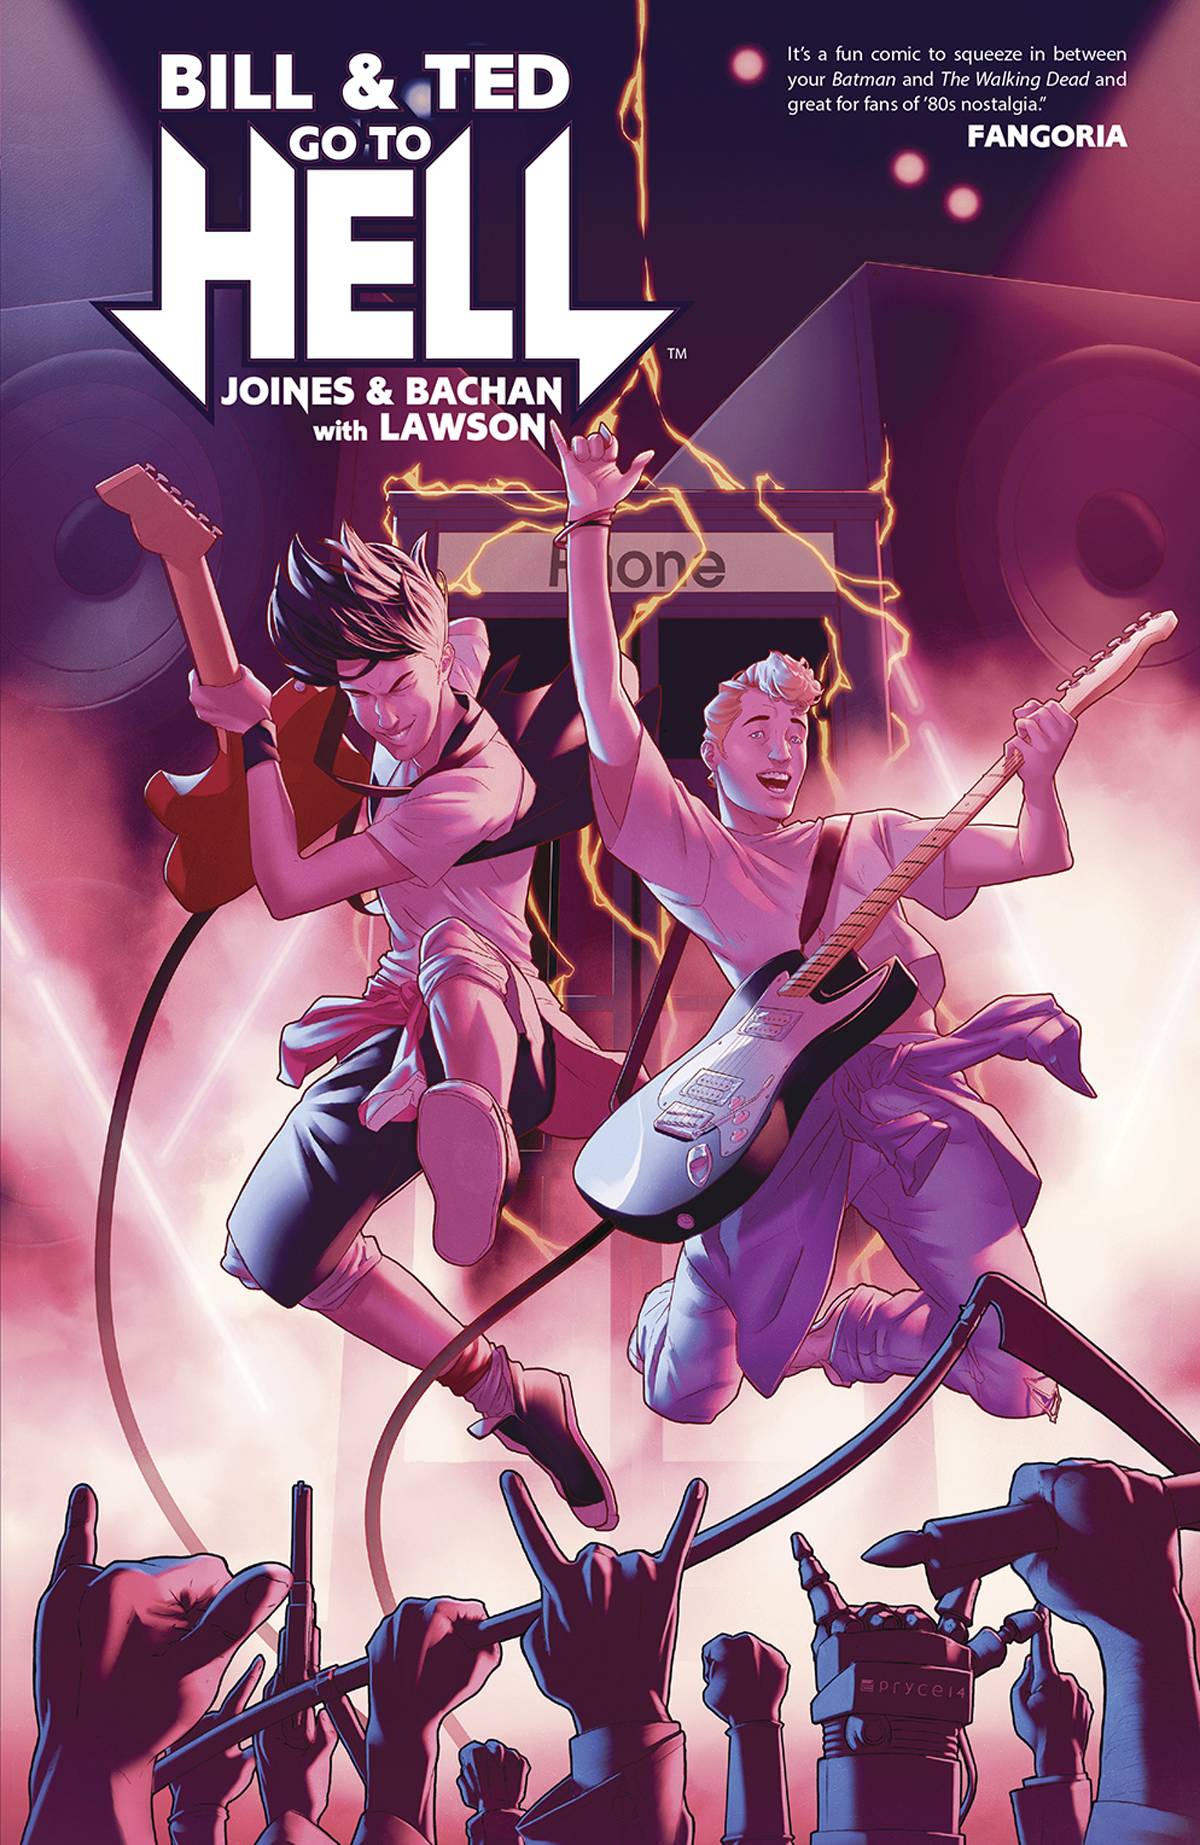 Bill & Ted Go To Hell Graphic Novel